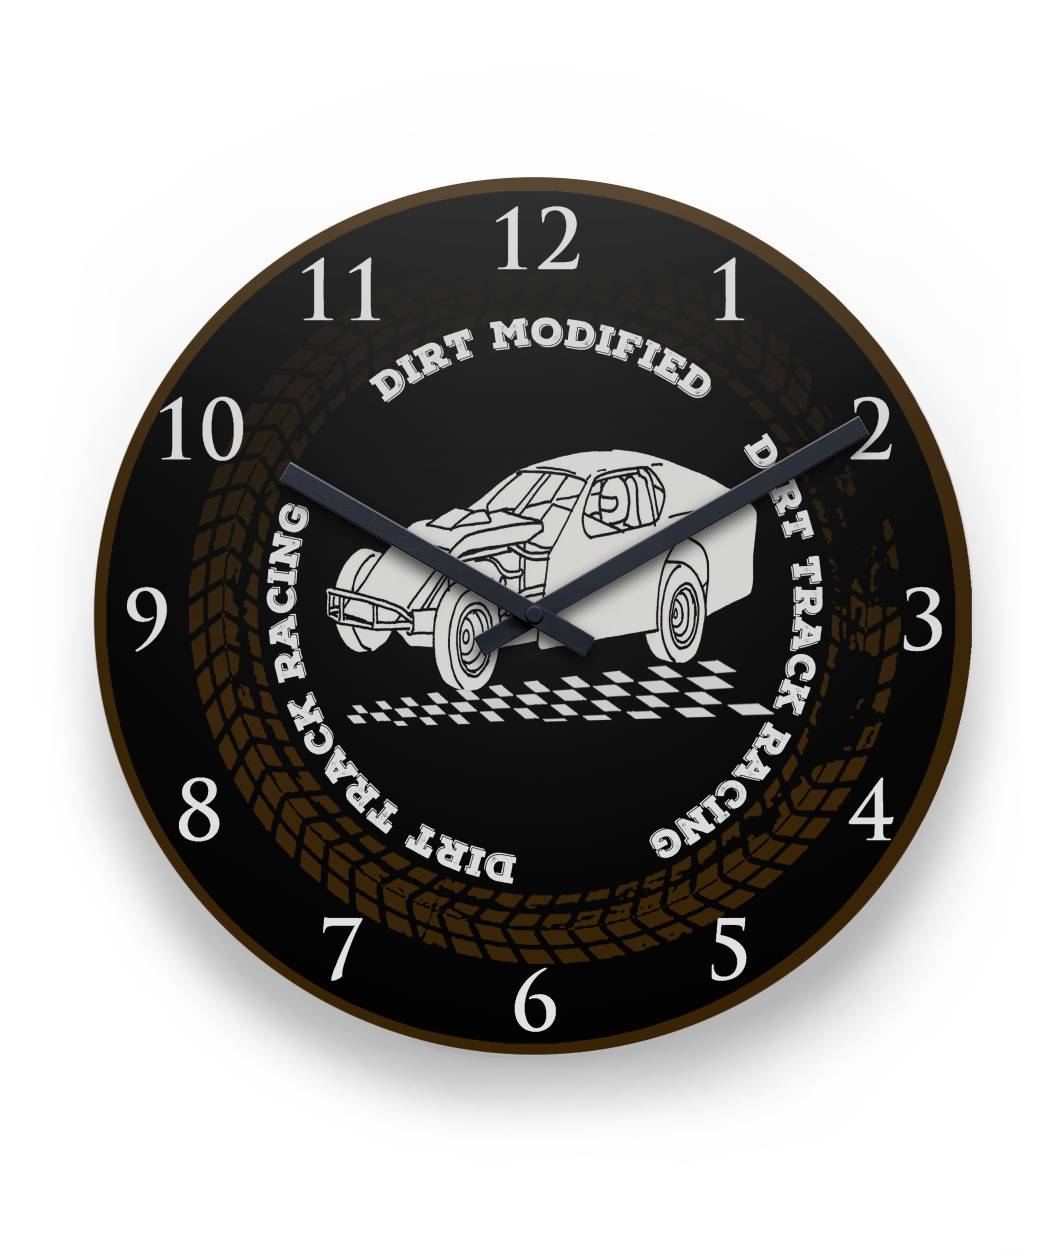 Dirt Modified Round Wall Clock